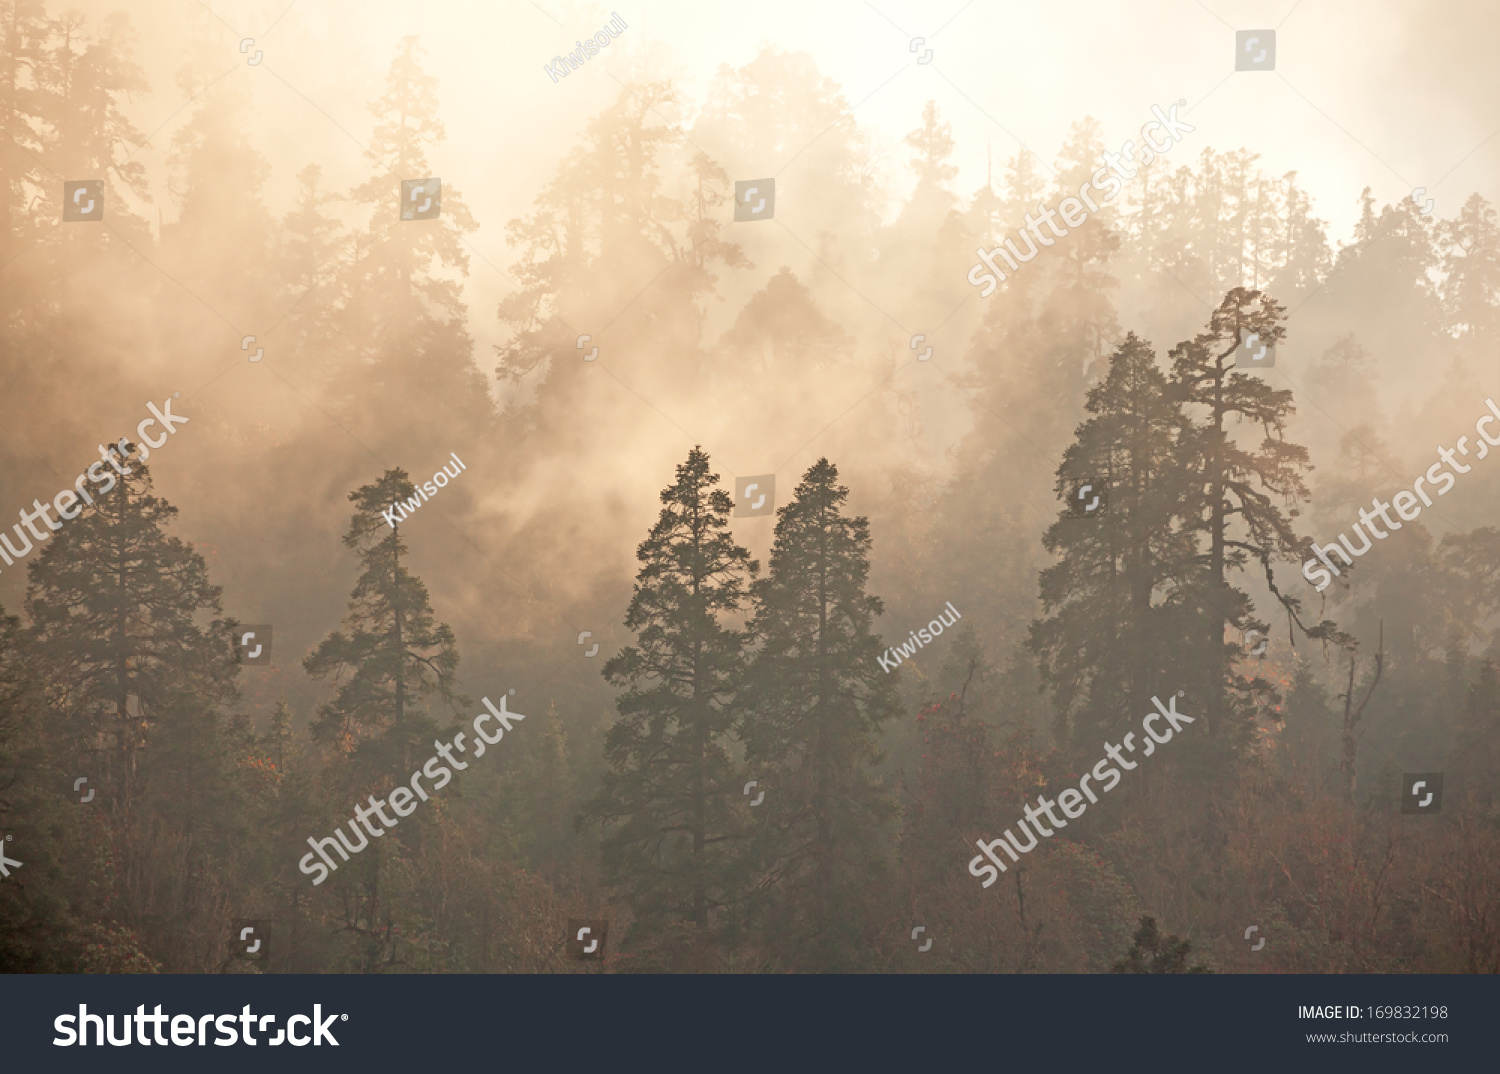 Majesty of nature: misty forest at sunrise. Himalayan pine-trees and rhododendrons. 
Canon 5D Mk II. #169832198